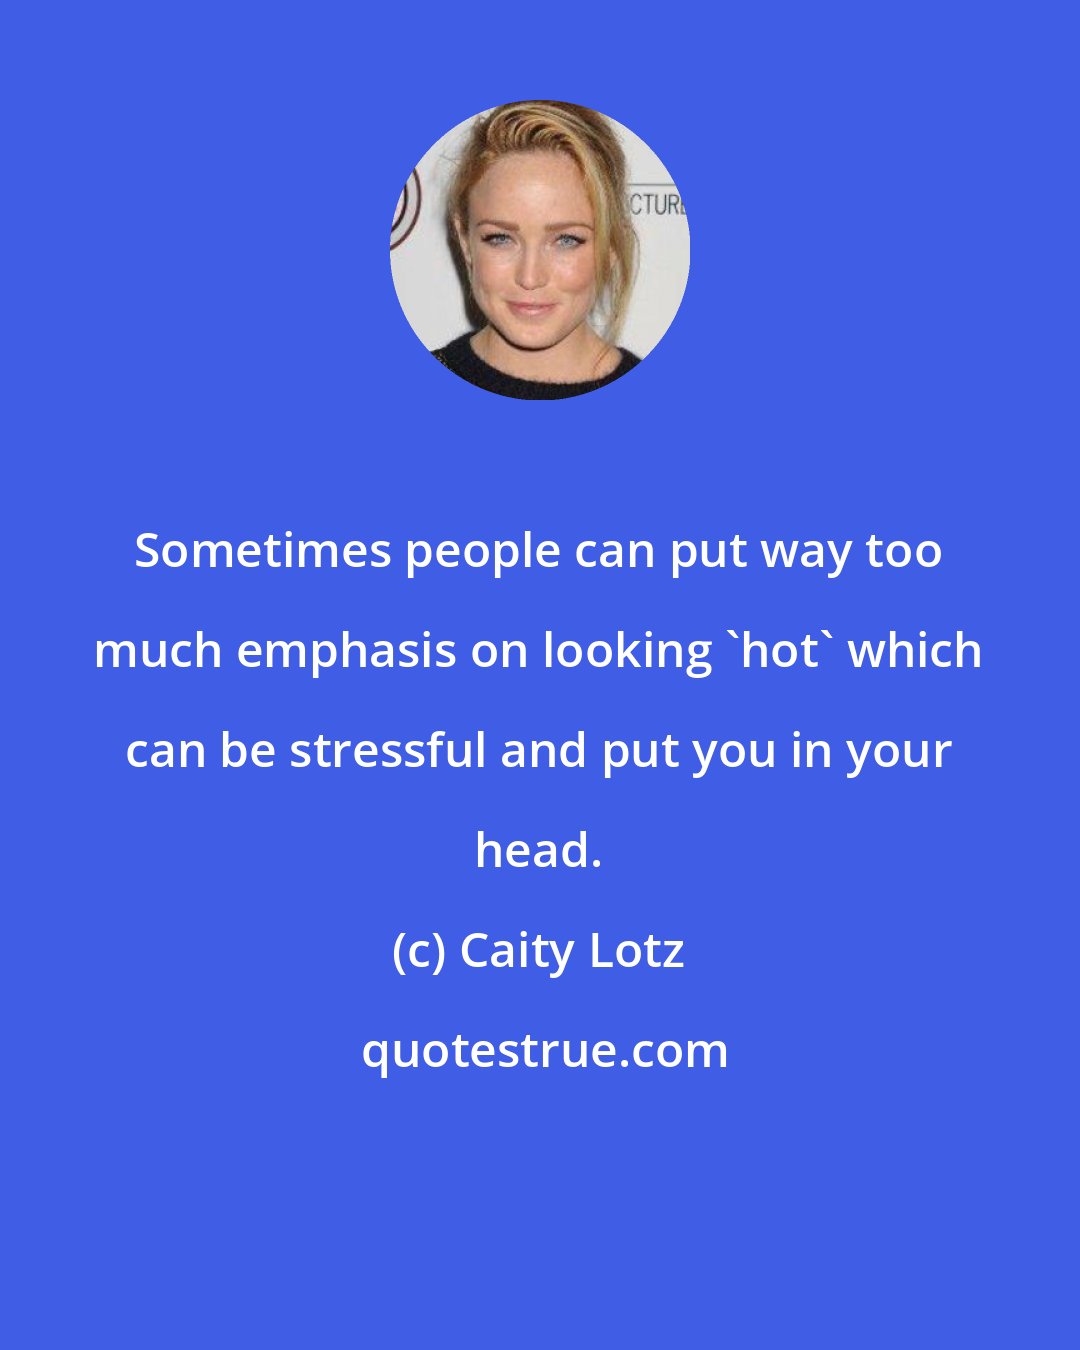 Caity Lotz: Sometimes people can put way too much emphasis on looking 'hot' which can be stressful and put you in your head.